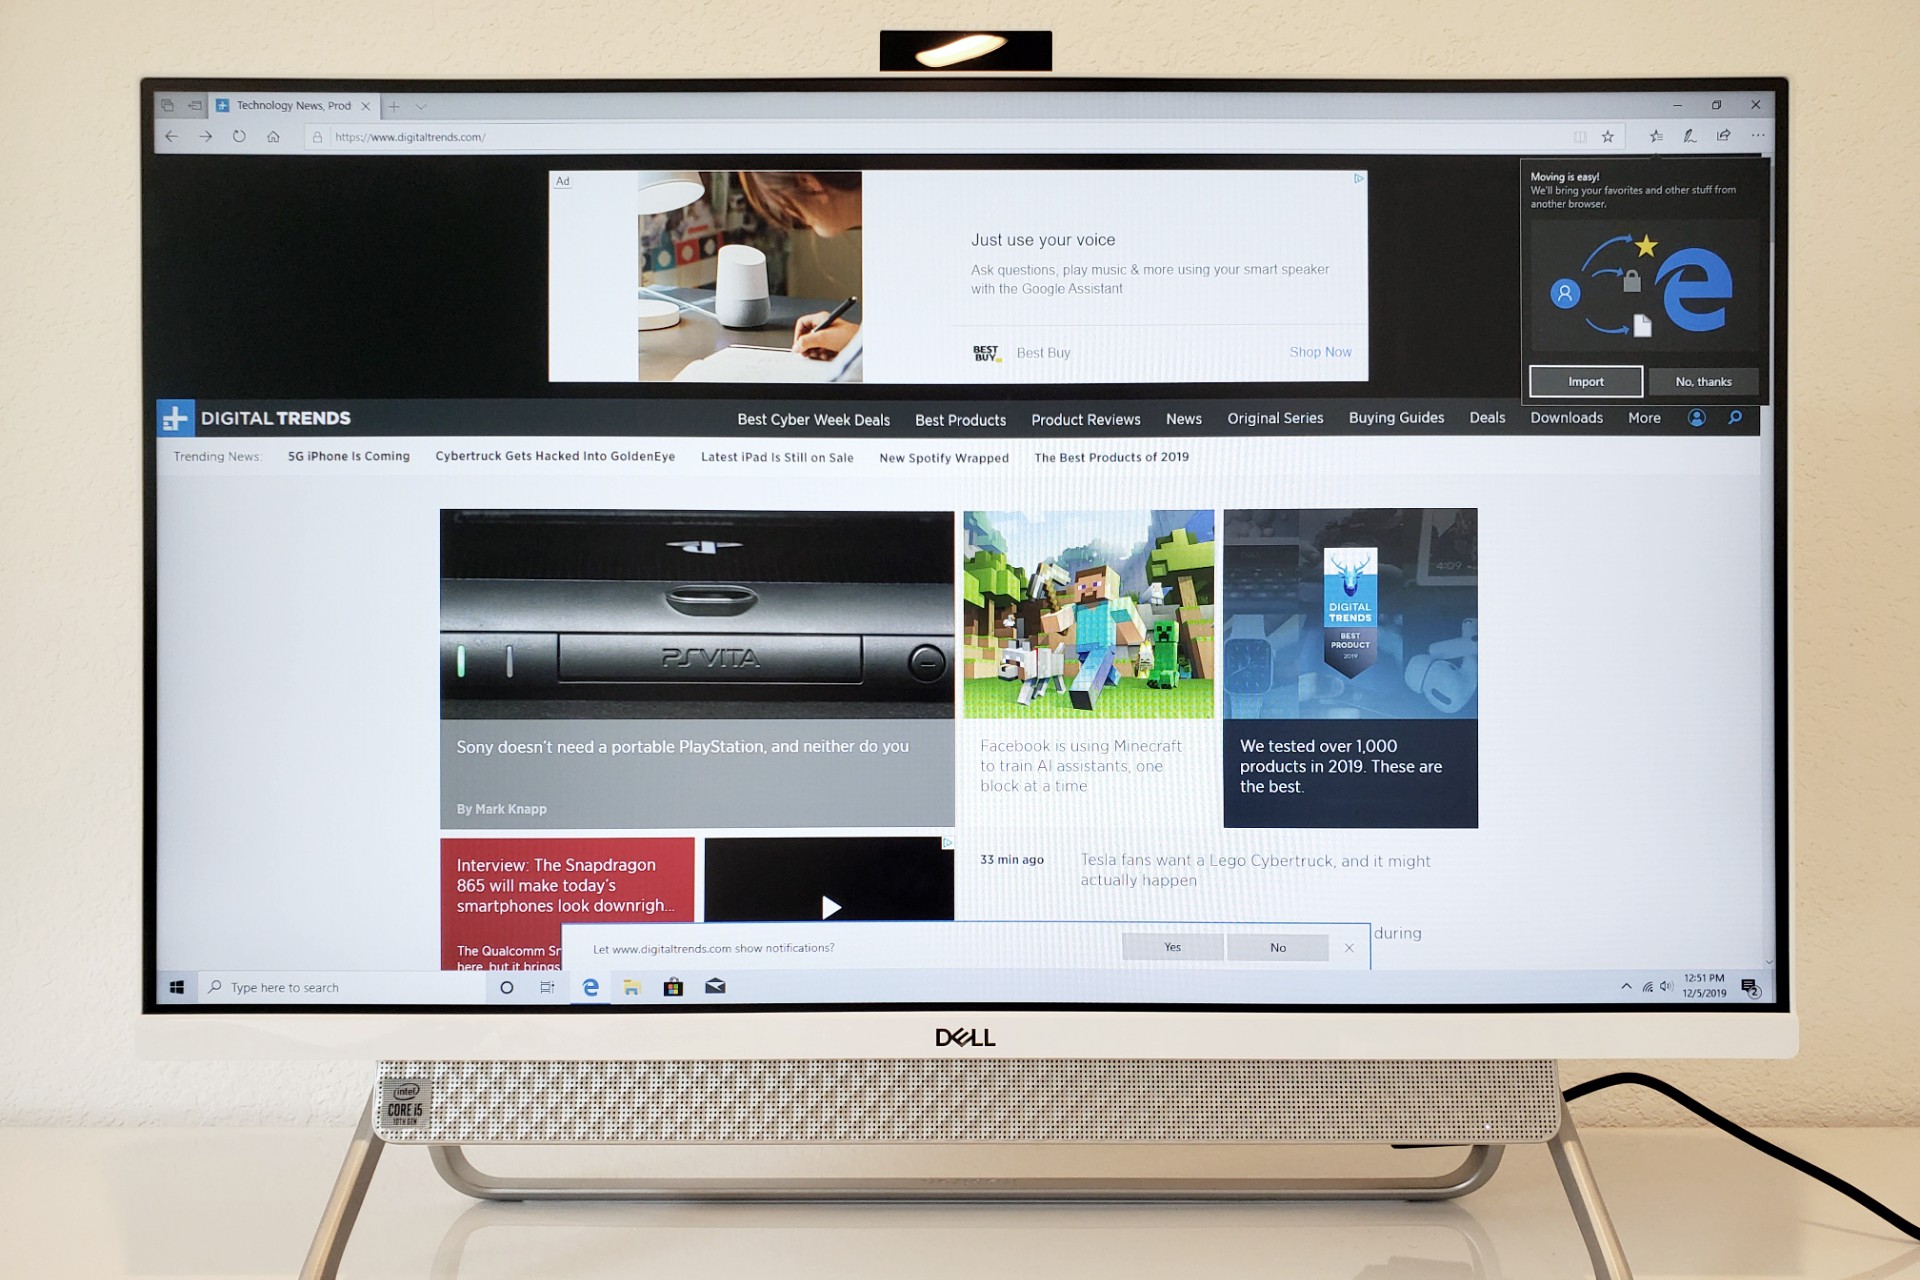 Dell Inspiron 27 7790 Review: PC or TV? | Digital Trends